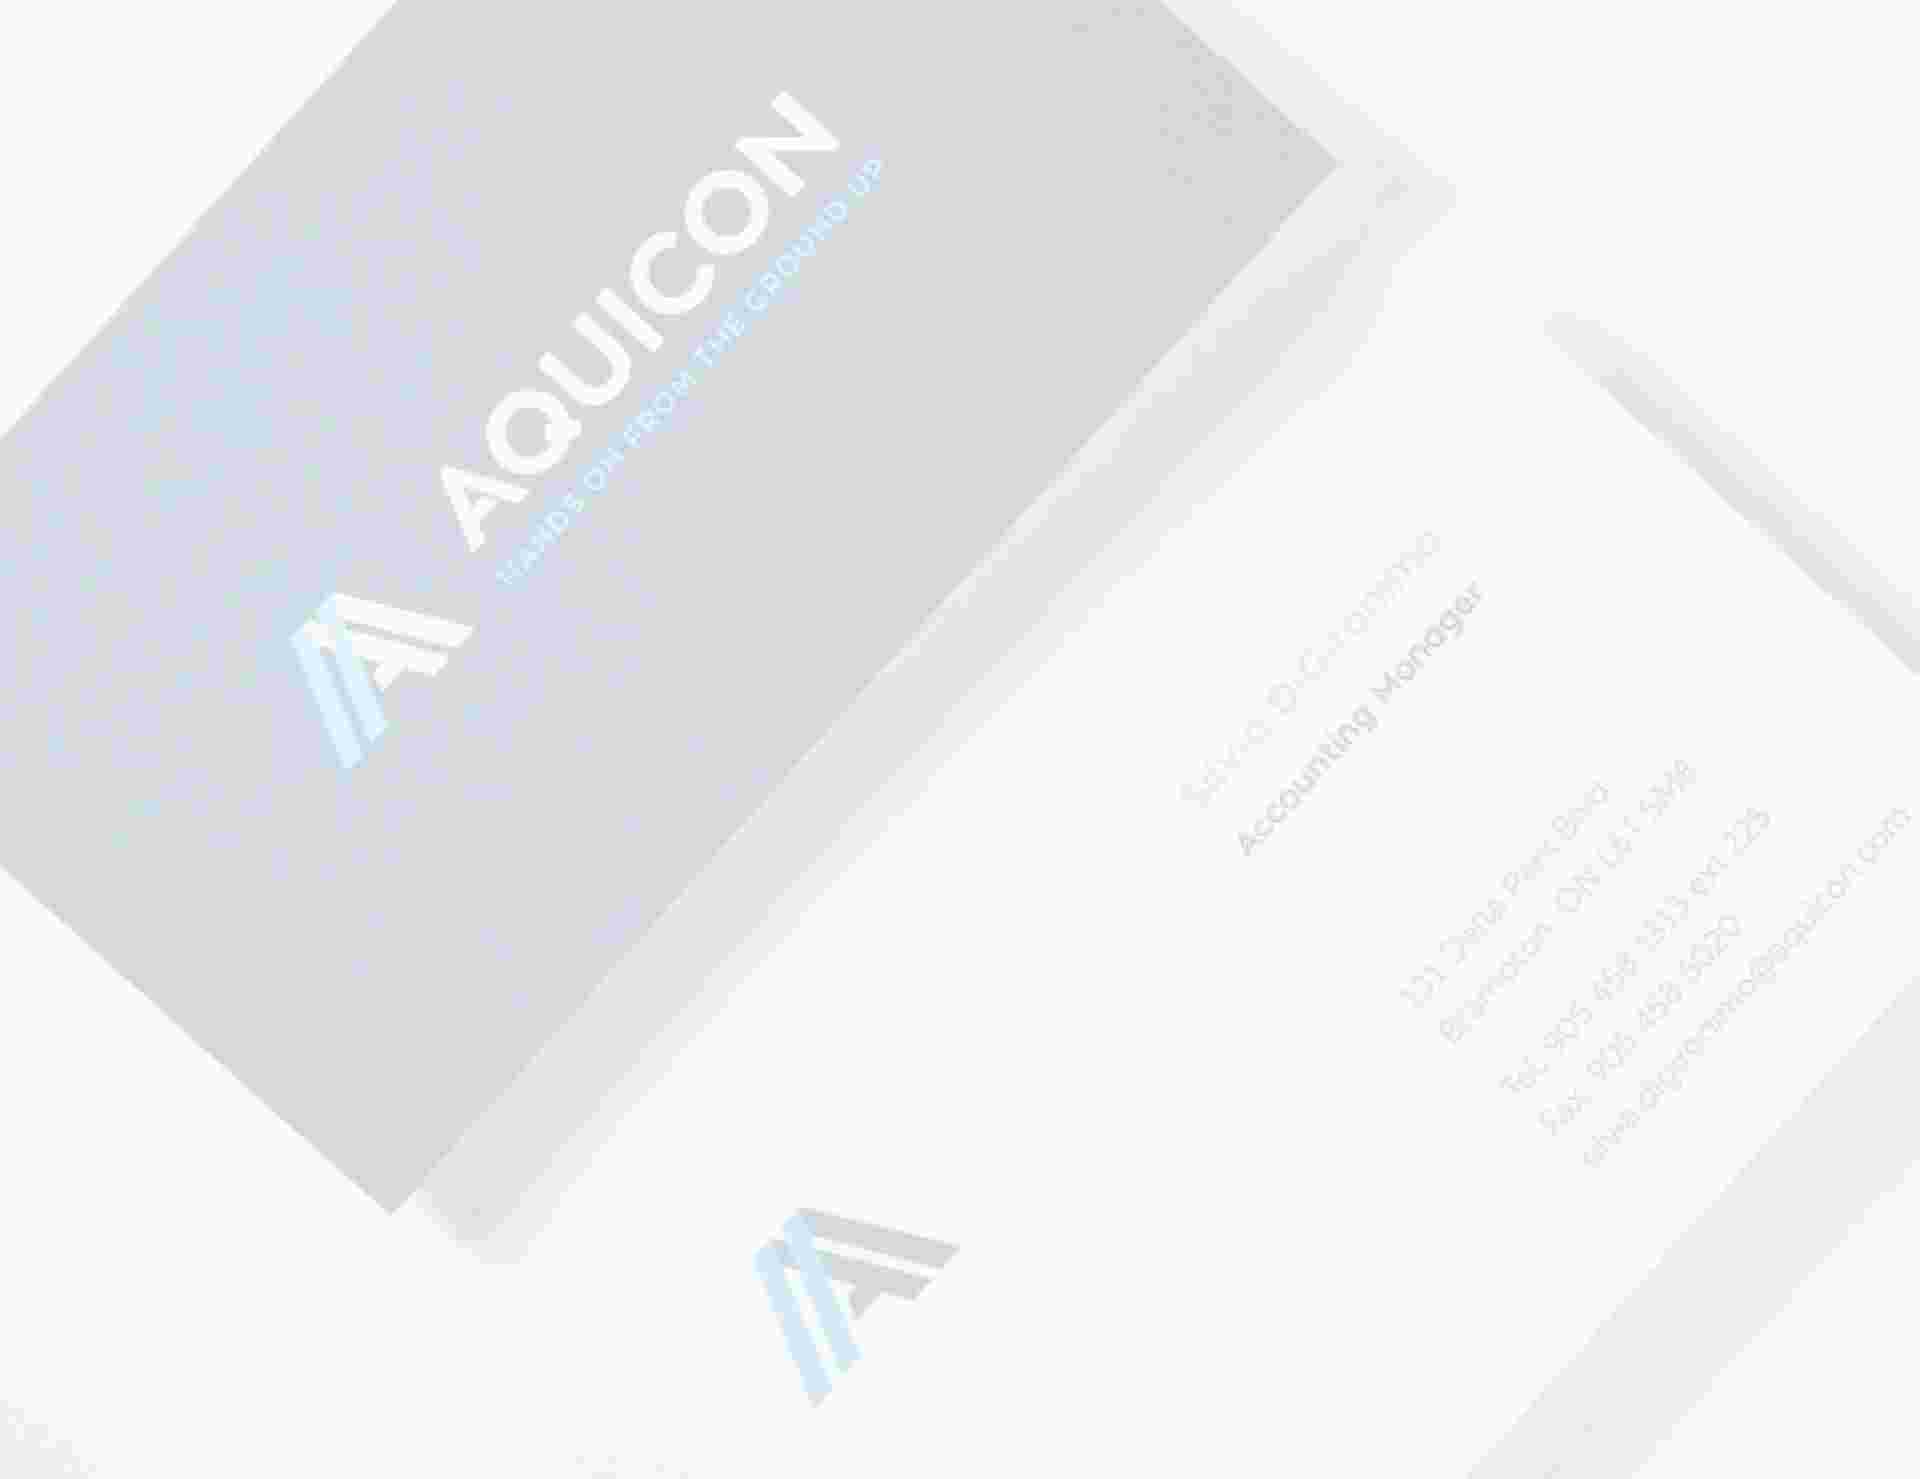 Helping Businesses Succeed - Aquicon_client_6col-NEW-BC